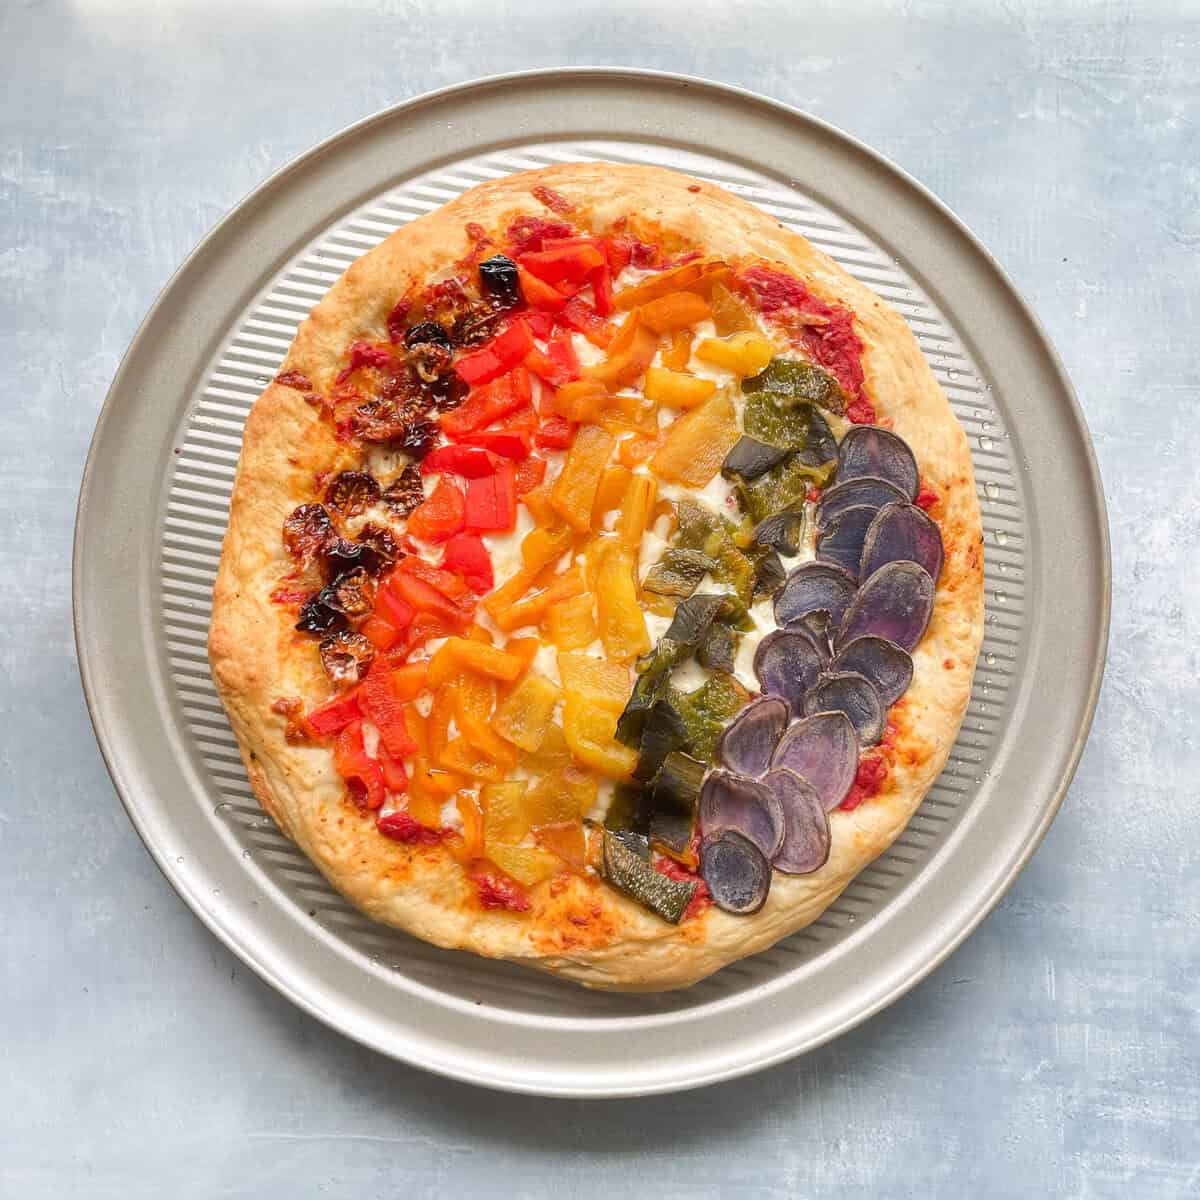 rainbow vegetable pizza on pizza pan with sun-dried tomatoes, bell peppers, poblano pepper, and purple potato slices in rainbow order.